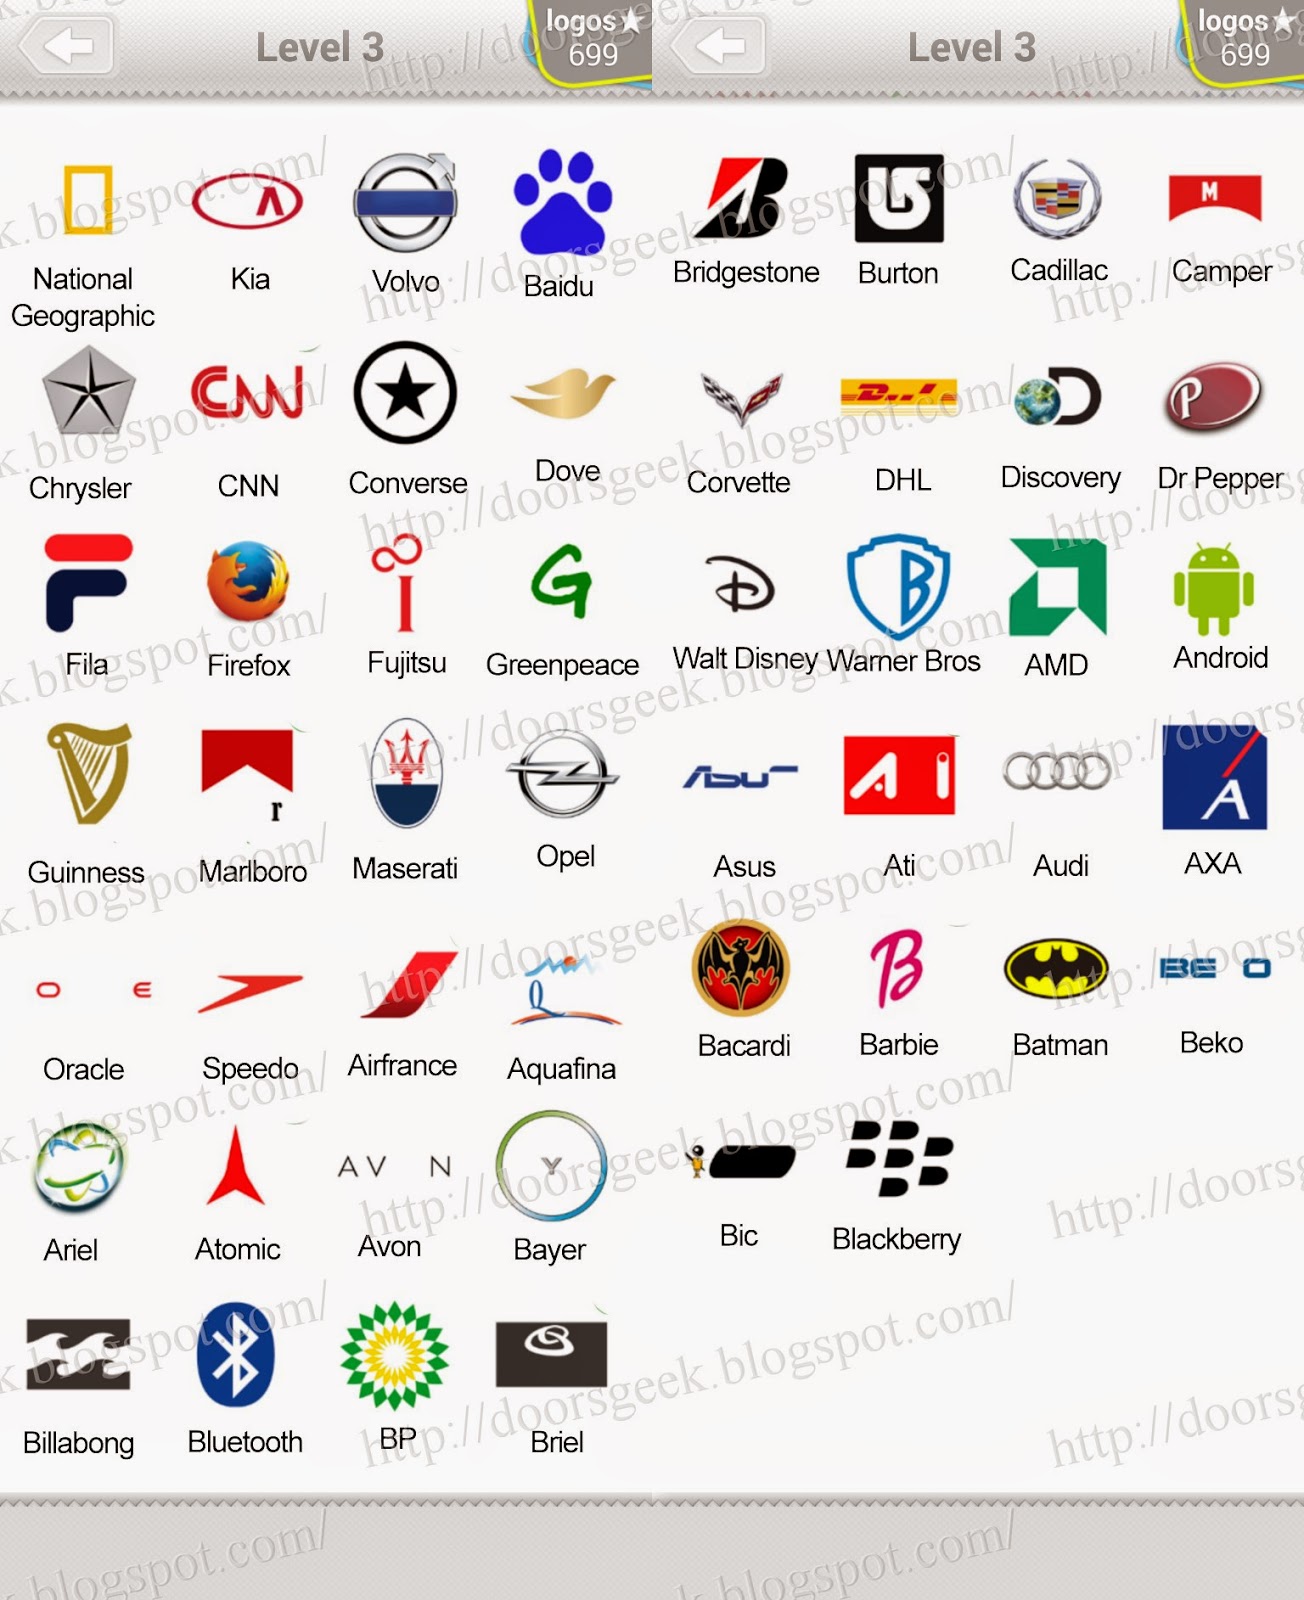 what's the logo answers